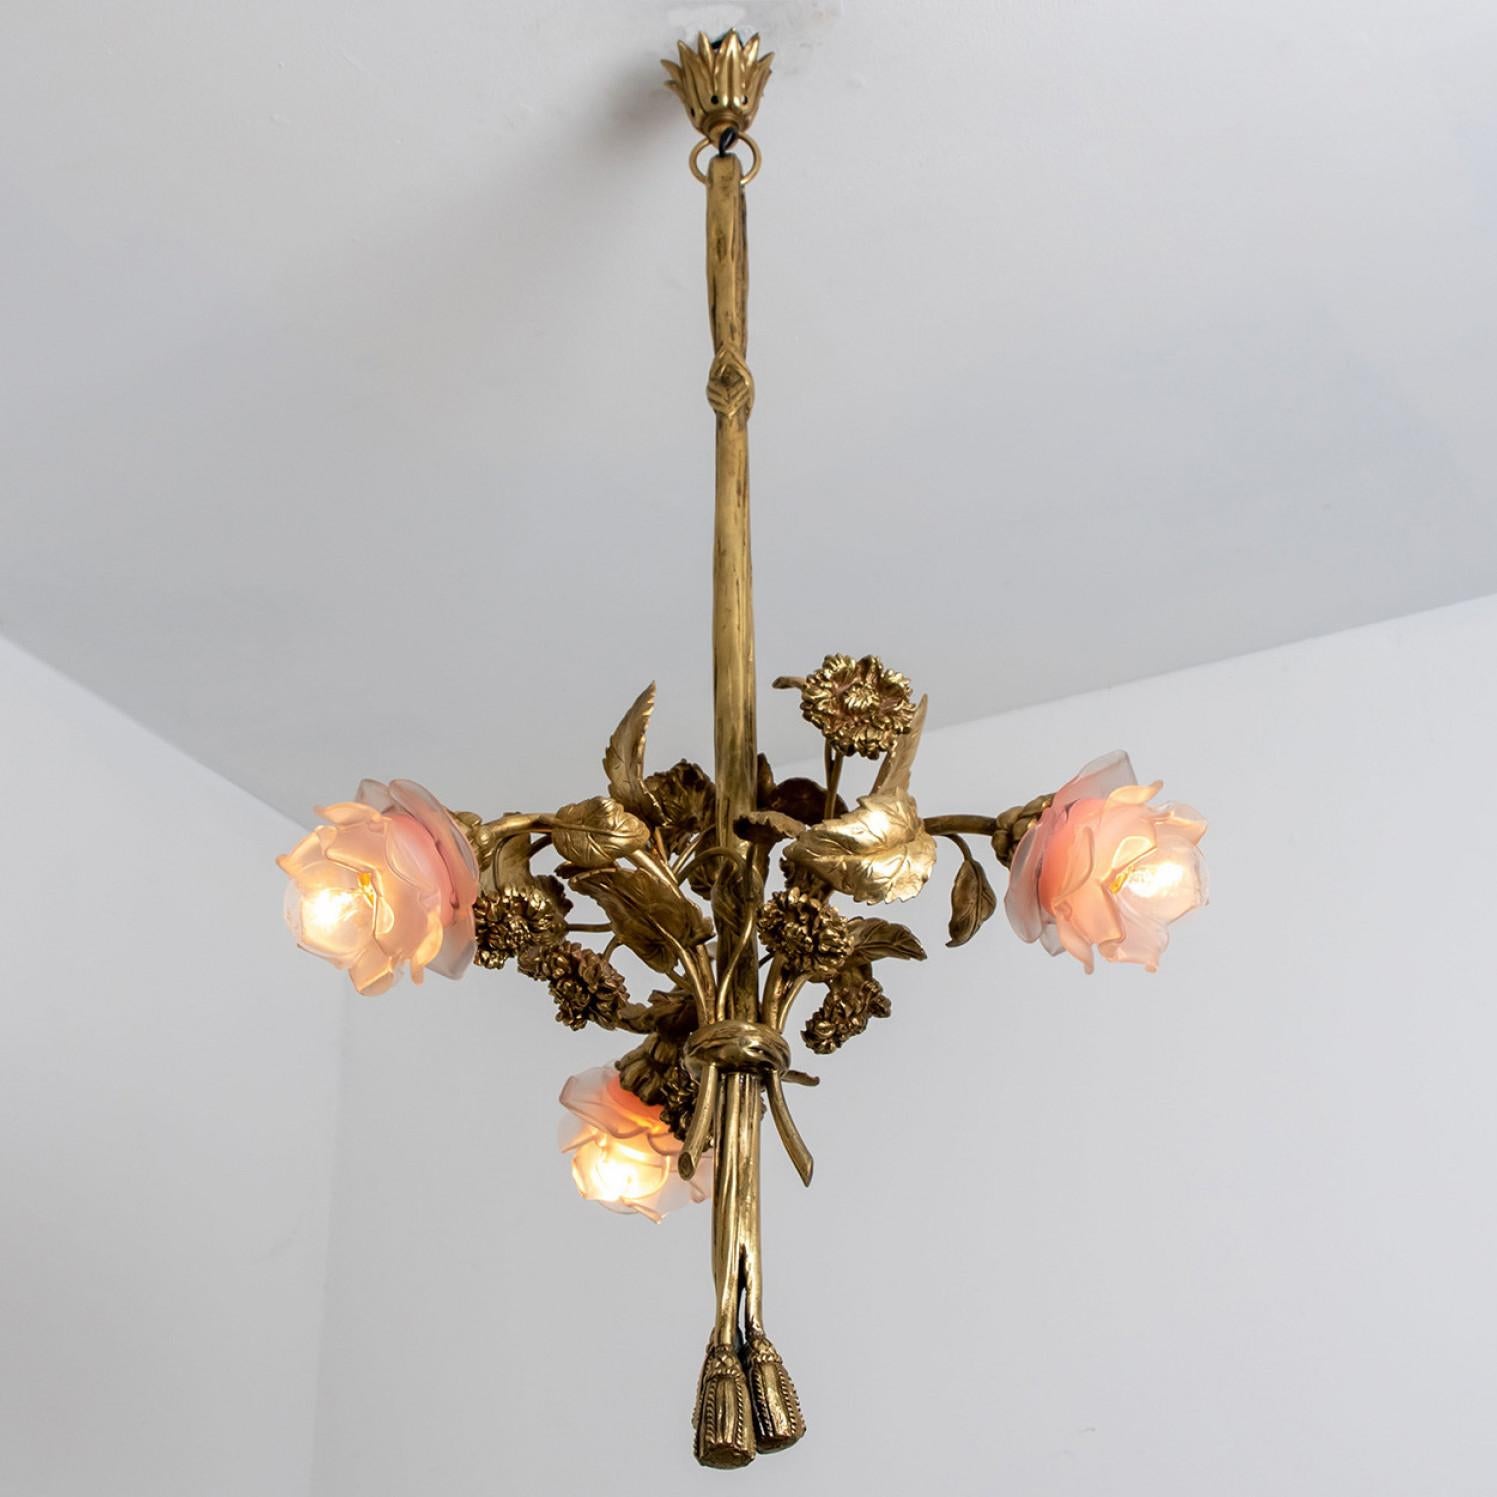 Exeptional Gilt Bronze and Glass Chandelier, France, circa 1890 In Distressed Condition For Sale In Rijssen, NL